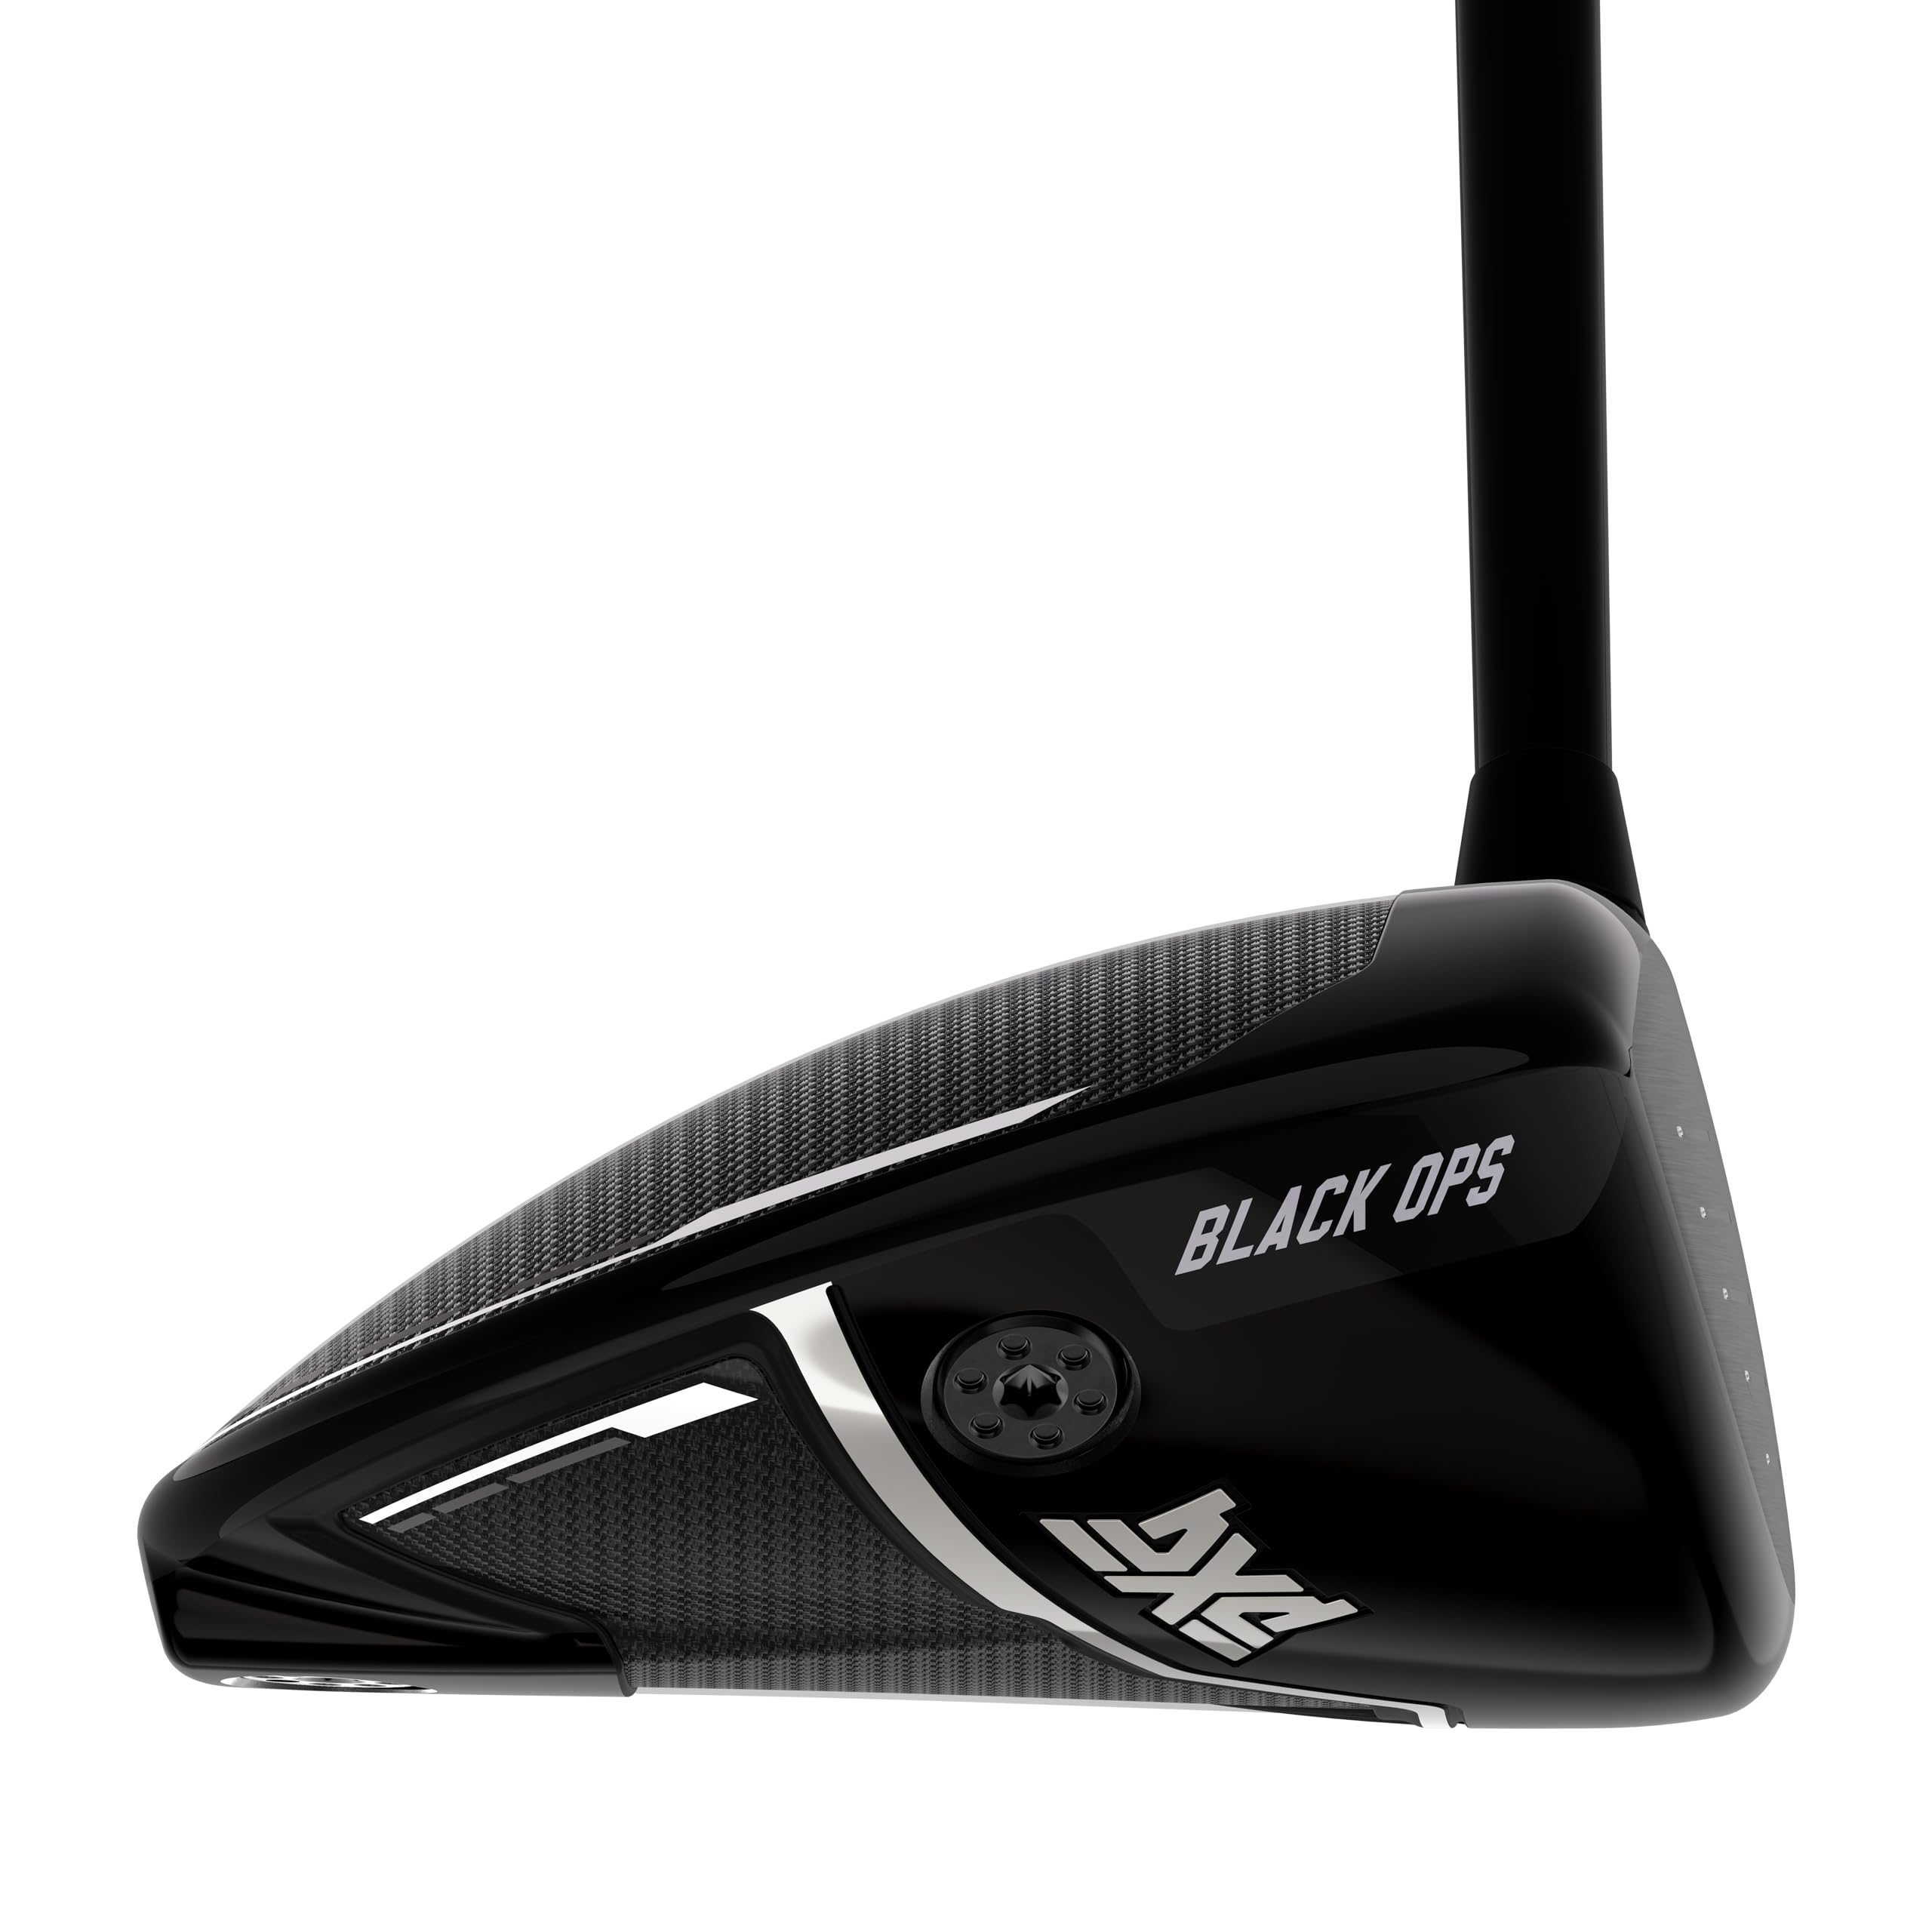 PXG Golf Driver - 0311 Black Ops Right Handed Golf Club in 9 or 10.5 Degree with Adjustable Loft and Lie Hosel Available in Stiff, Regular, or Senior Flex Graphite Shaft